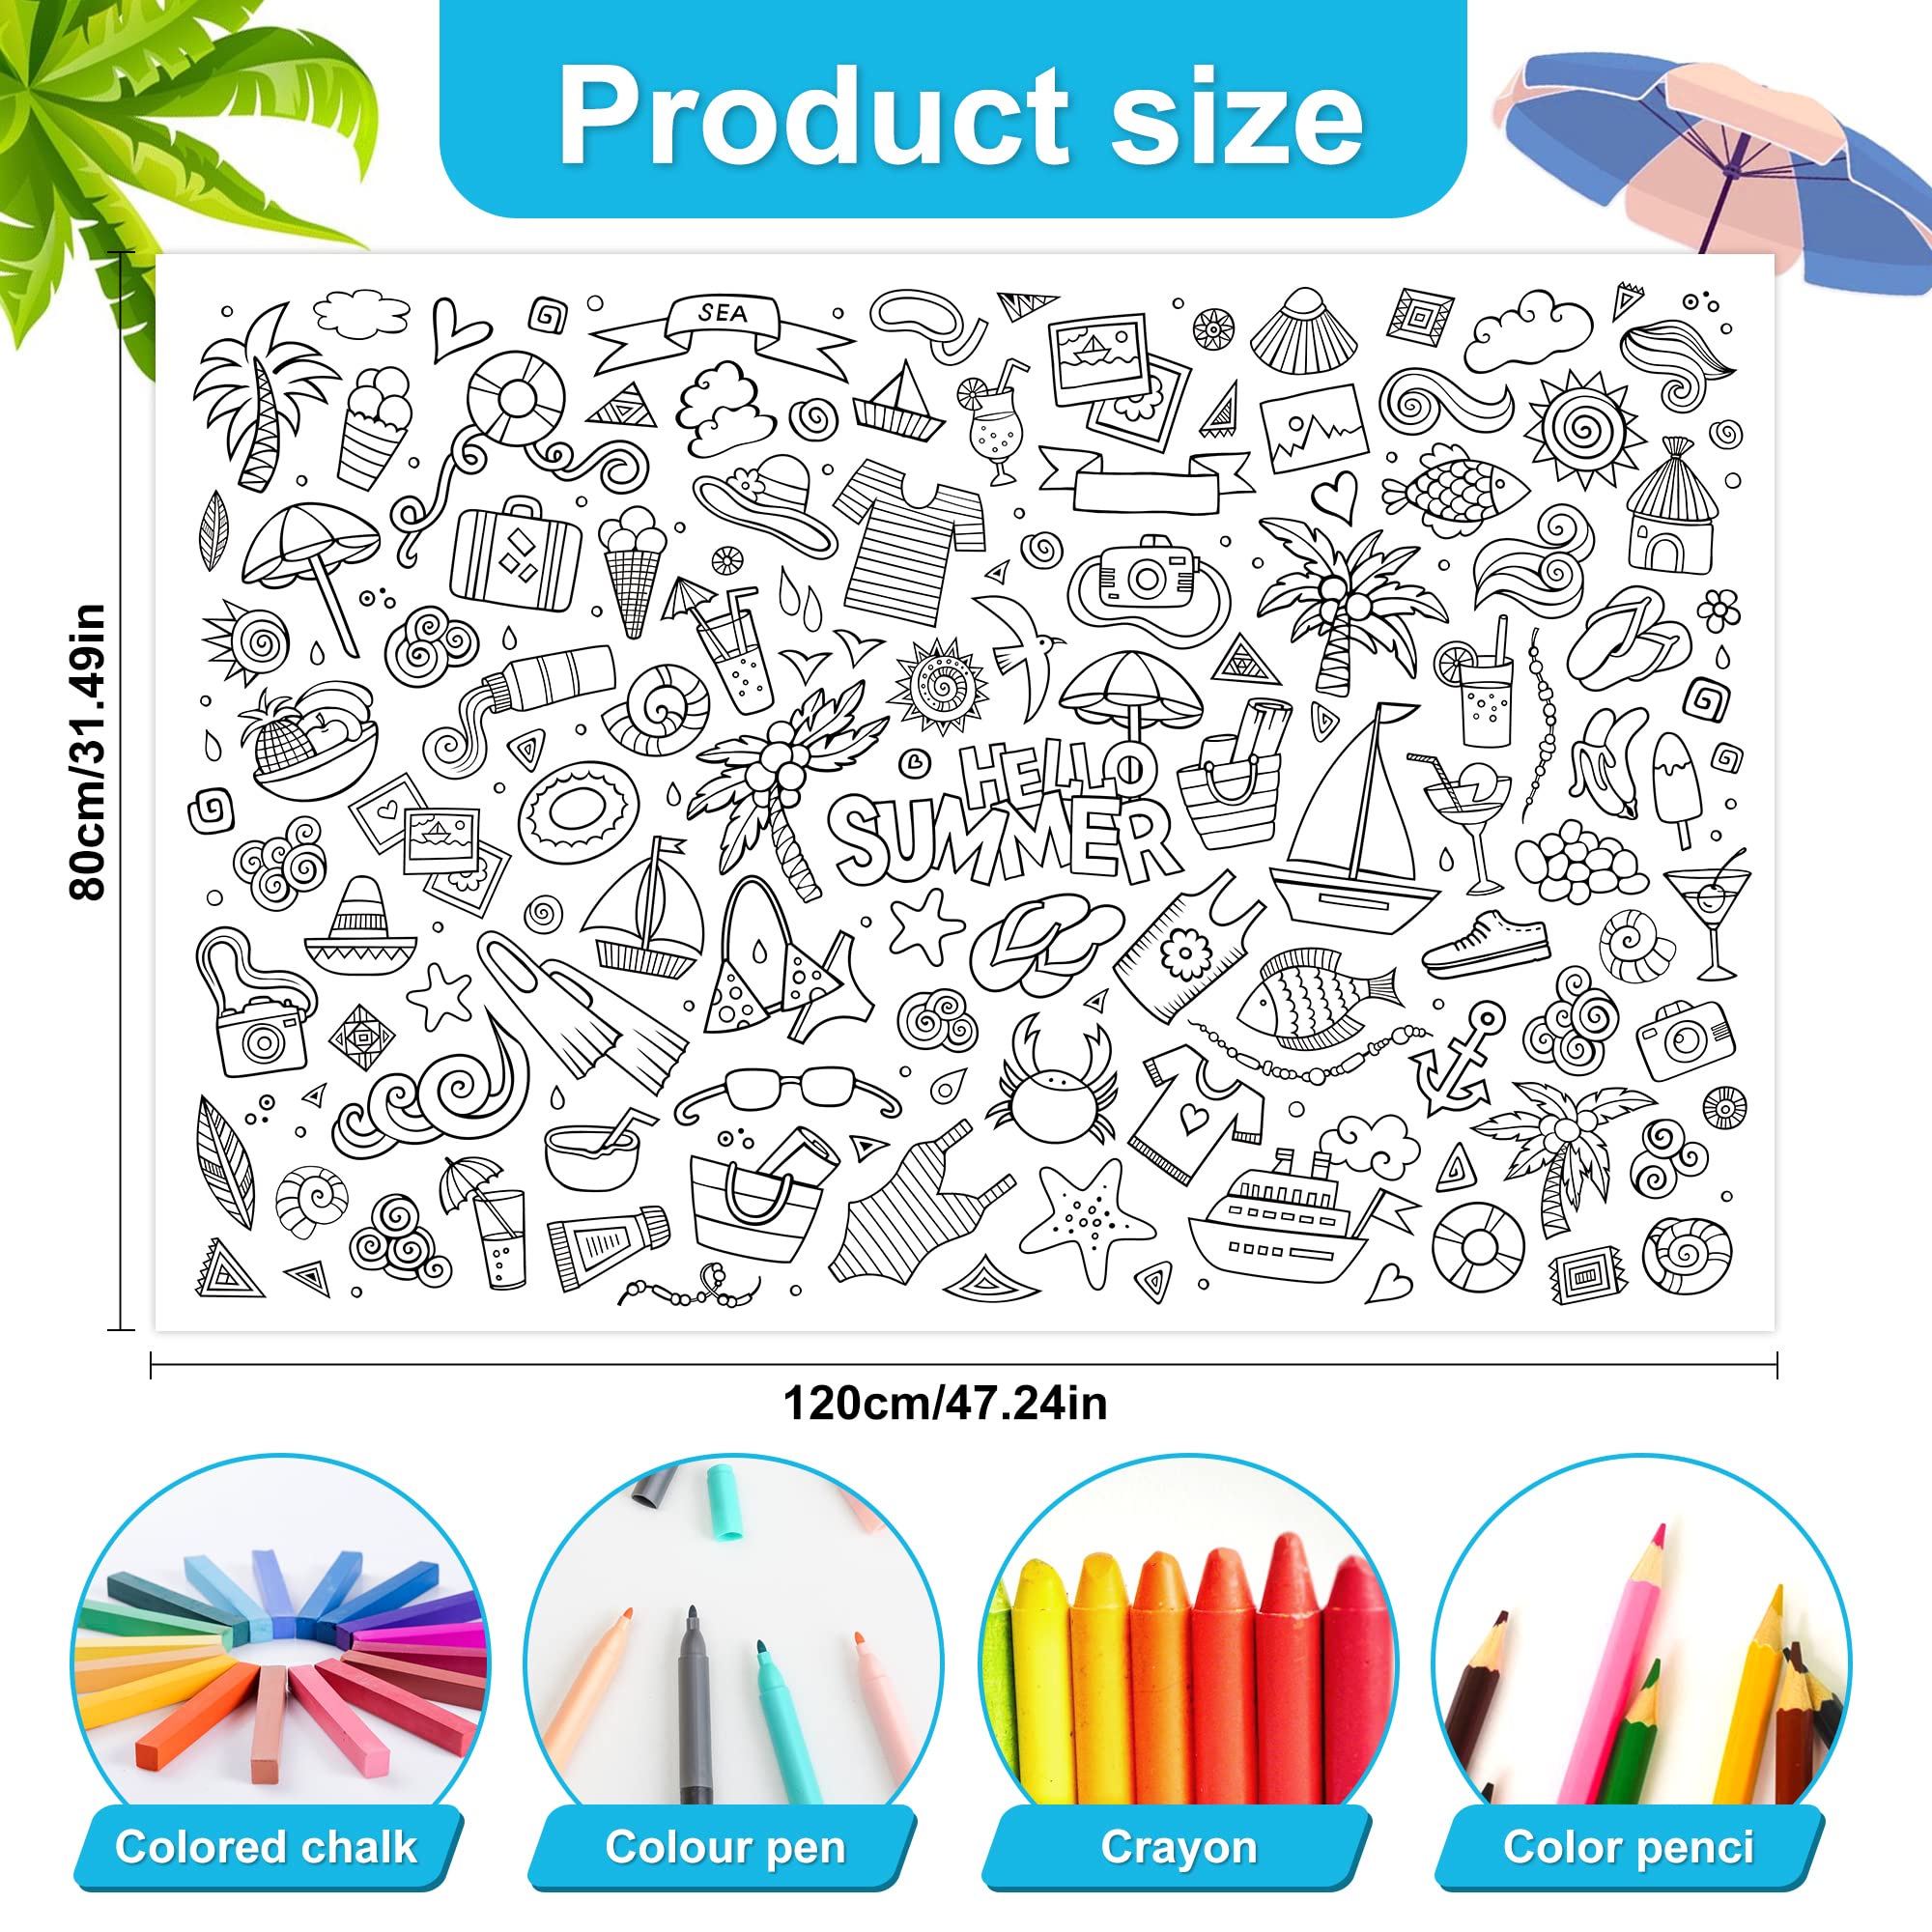 Hello summer giant coloring poster jumbo sea coloring poster for kids x inch large coloring banner for classroom group home party art craft activity supplies favor toys games